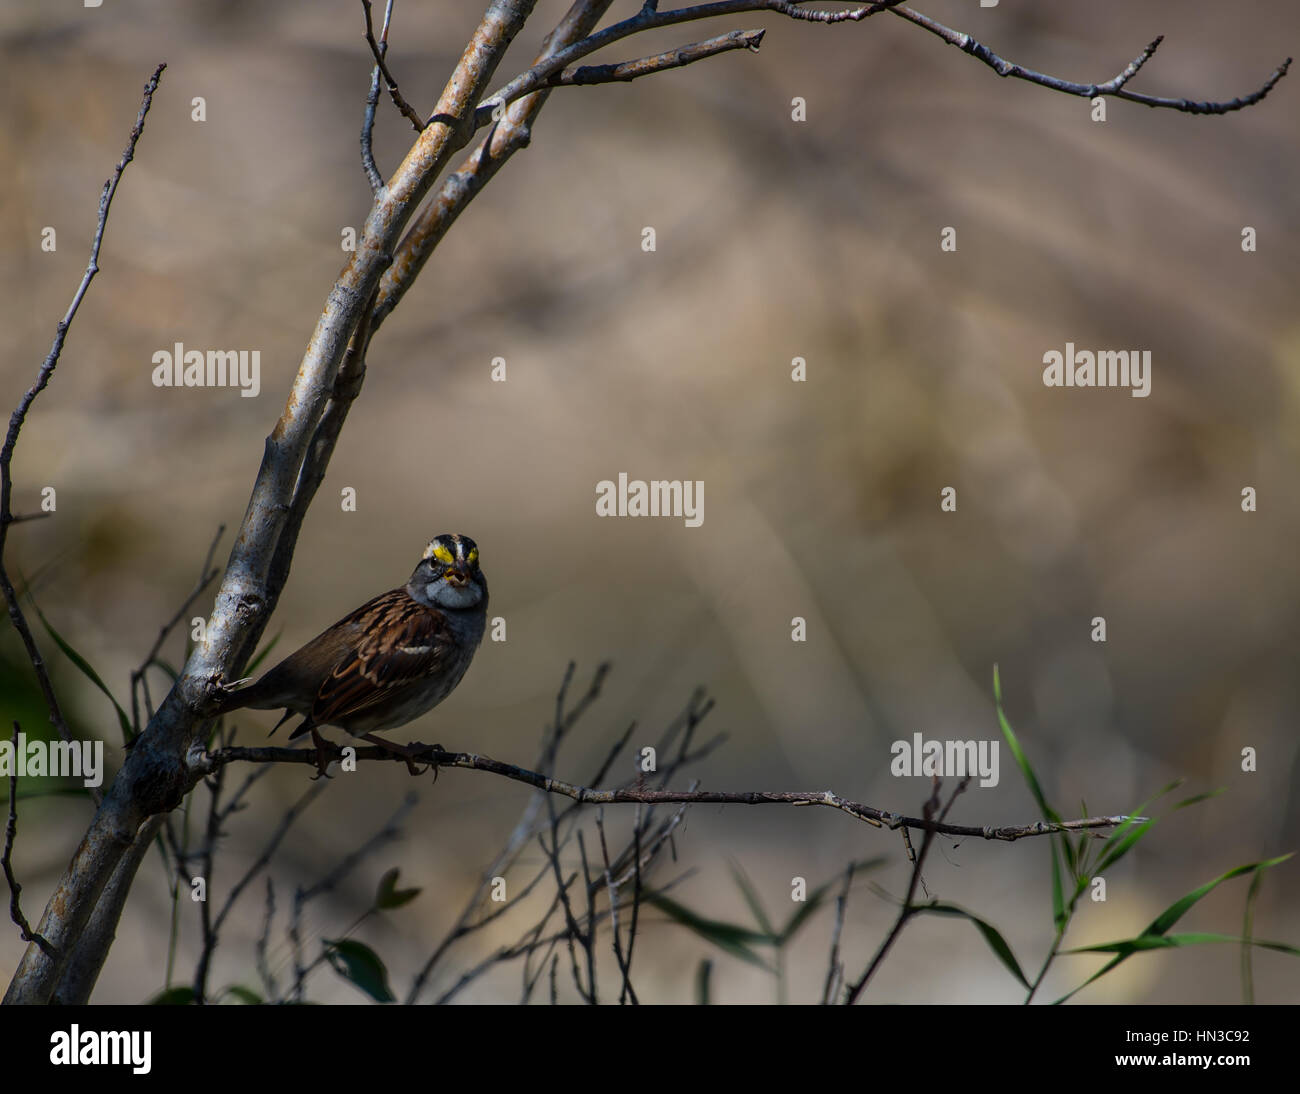 White-throated Sparrow on a branch Stock Photo